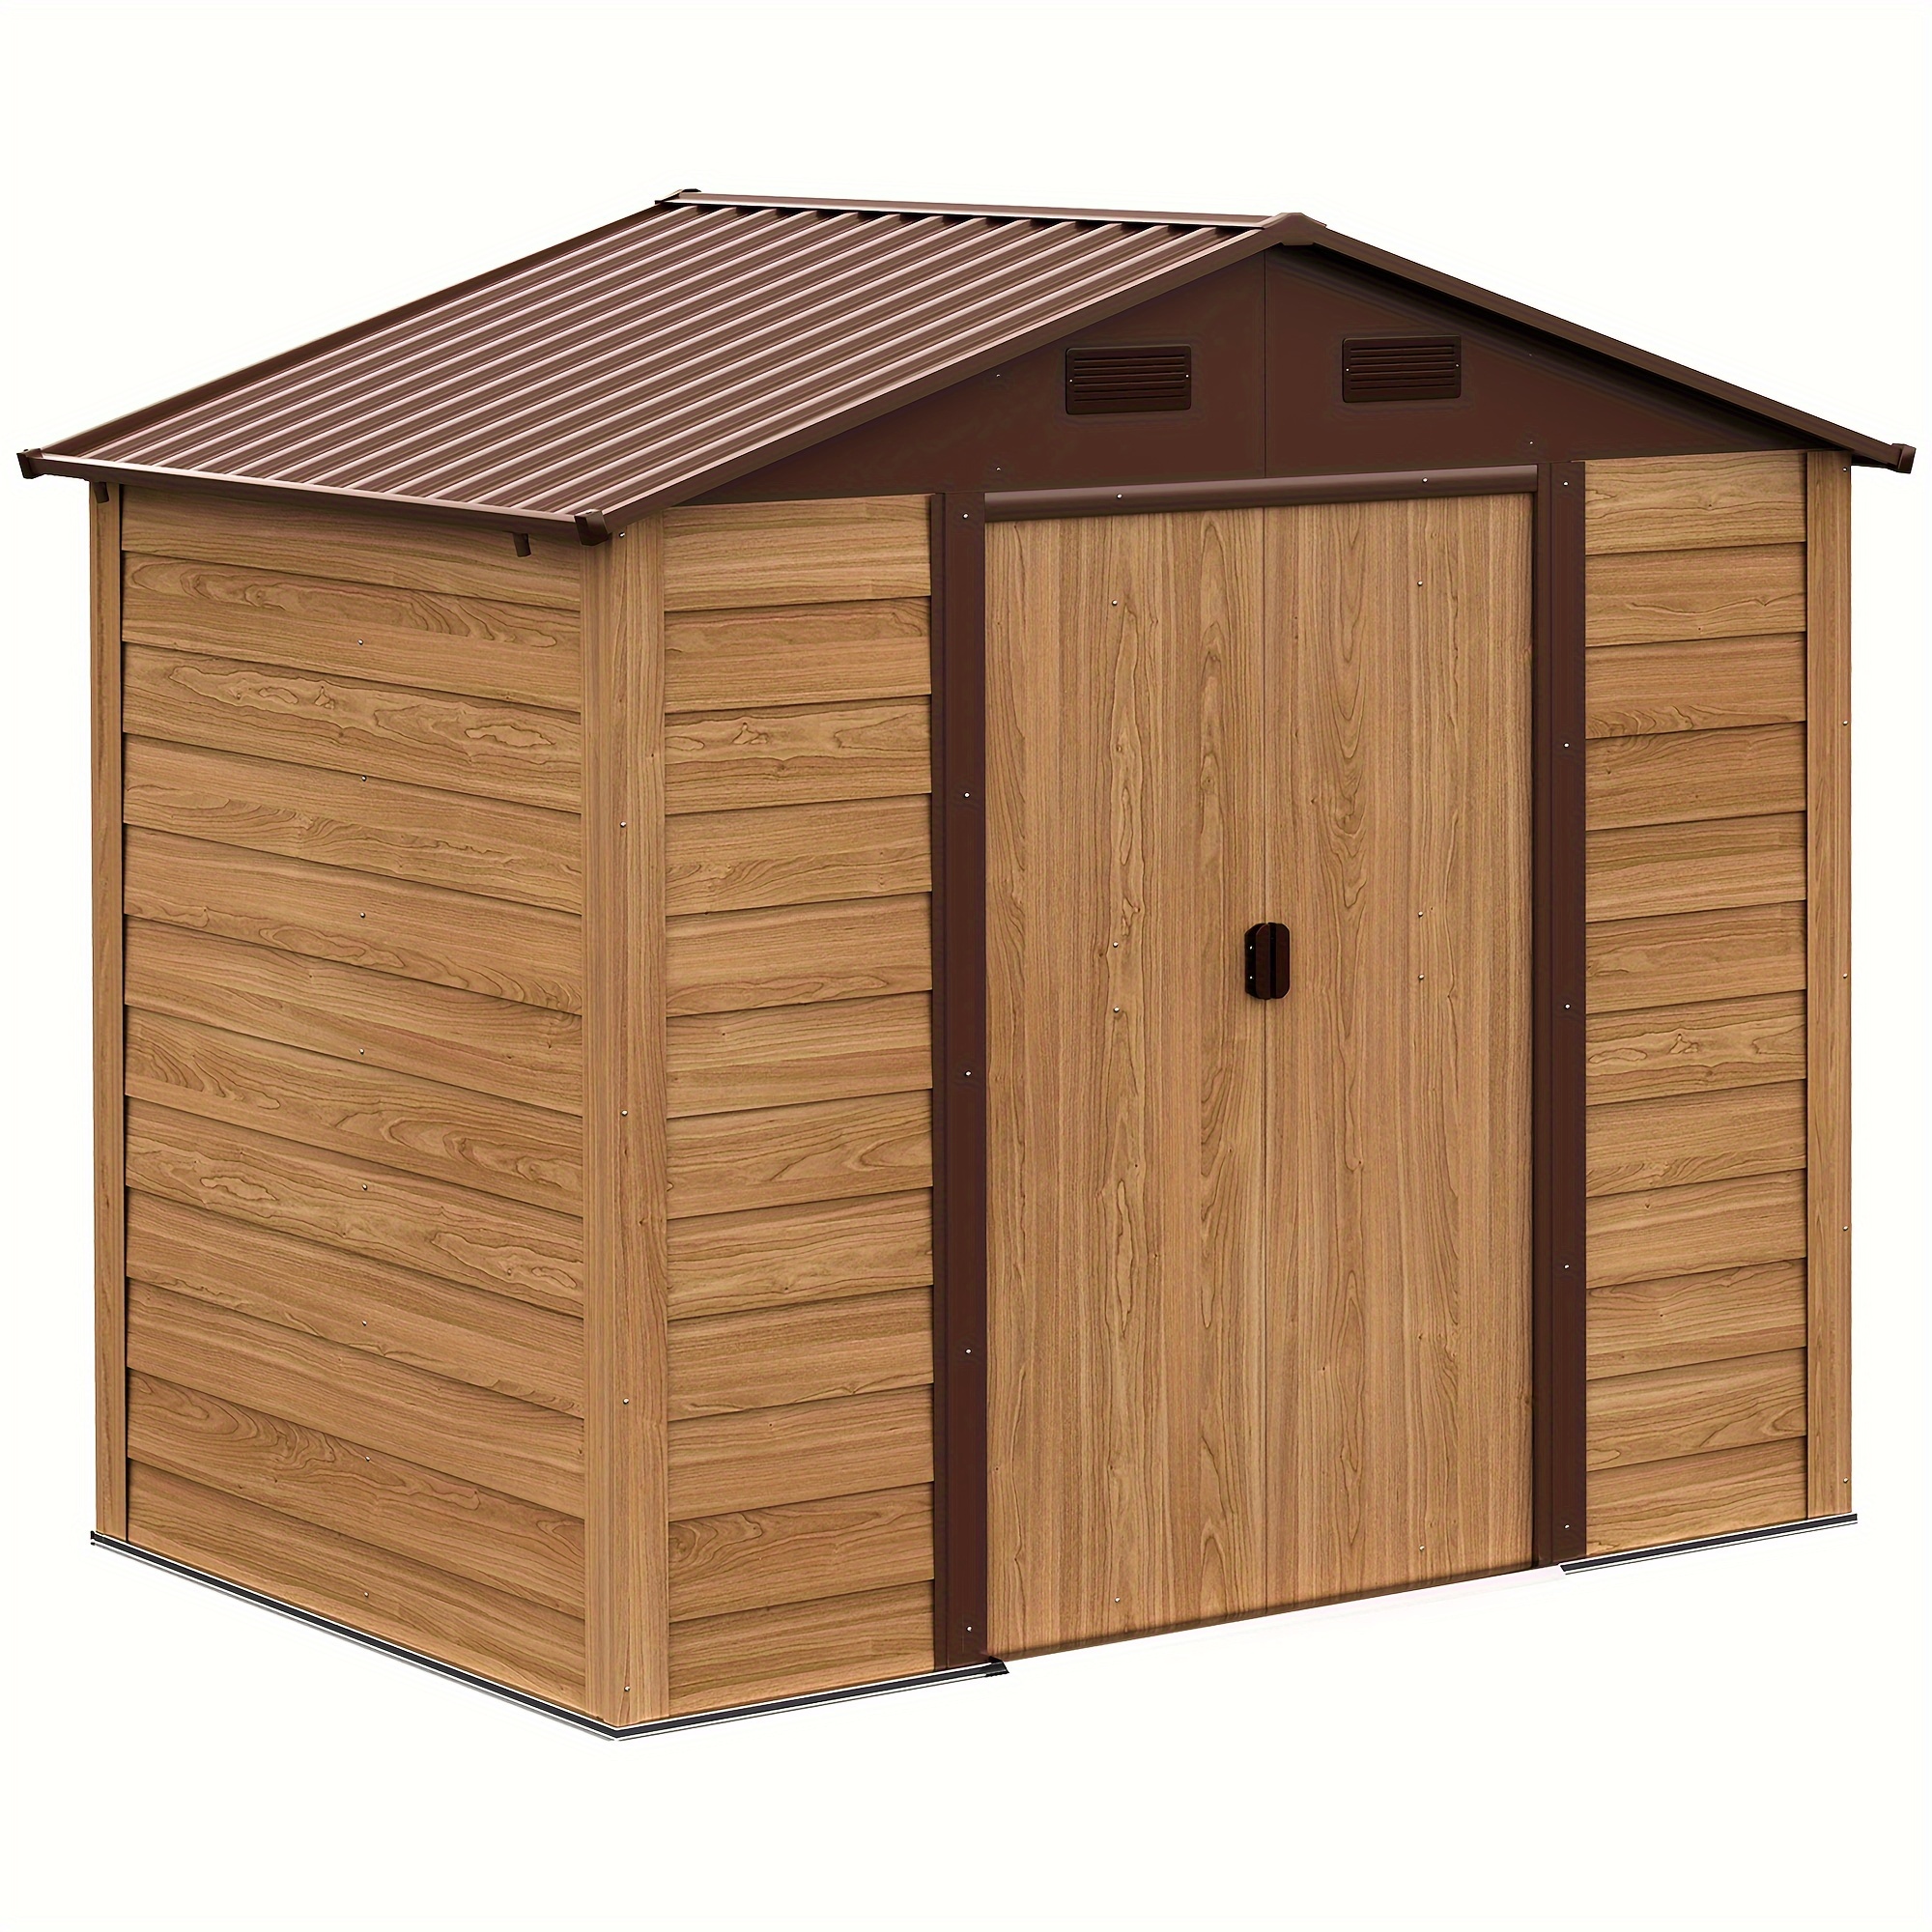 

Outsunny 8' X 6' Outdoor Storage Shed, Garden With Foundation Kit, 4 Vents And Sliding Doors For Backyard, Patio, Garage, Lawn, Brown